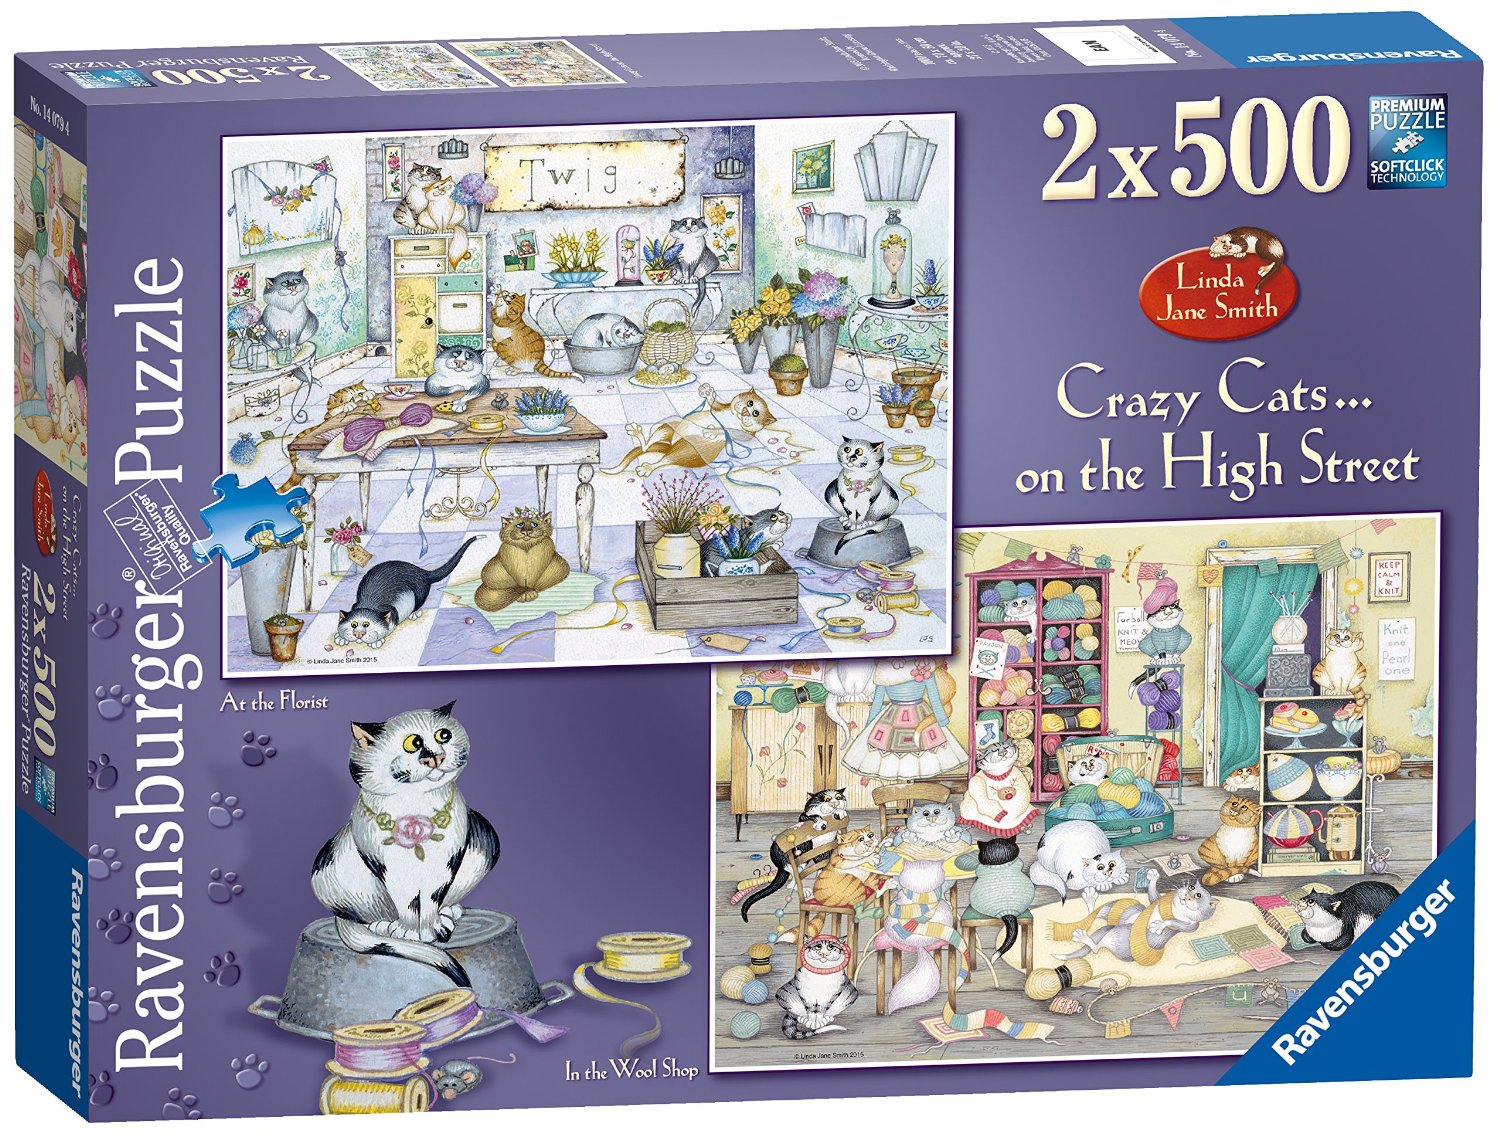 Ravensburger Crazy Cats on The High Street 2x500 Piece Jigsaw Puzzle Game